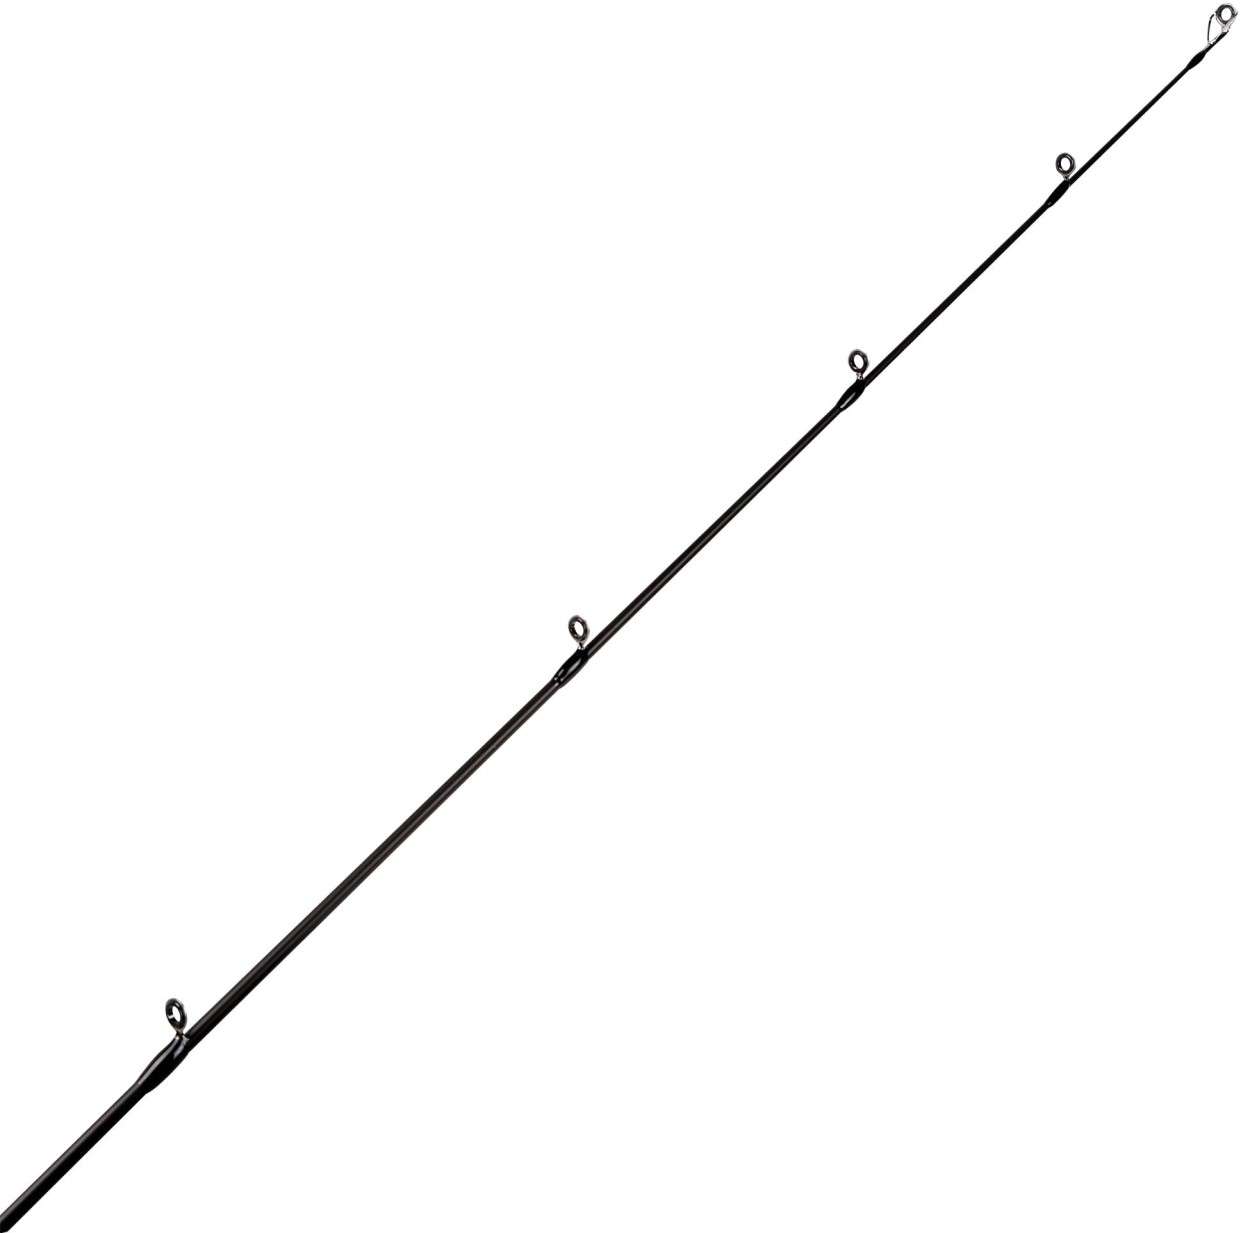 Okuma Celilo Spinning Rod, 2 Piece, Moderate/Fast, Heavy 1/2-4oz Lures,  12lb - 25lb, 7 Guides + Tip